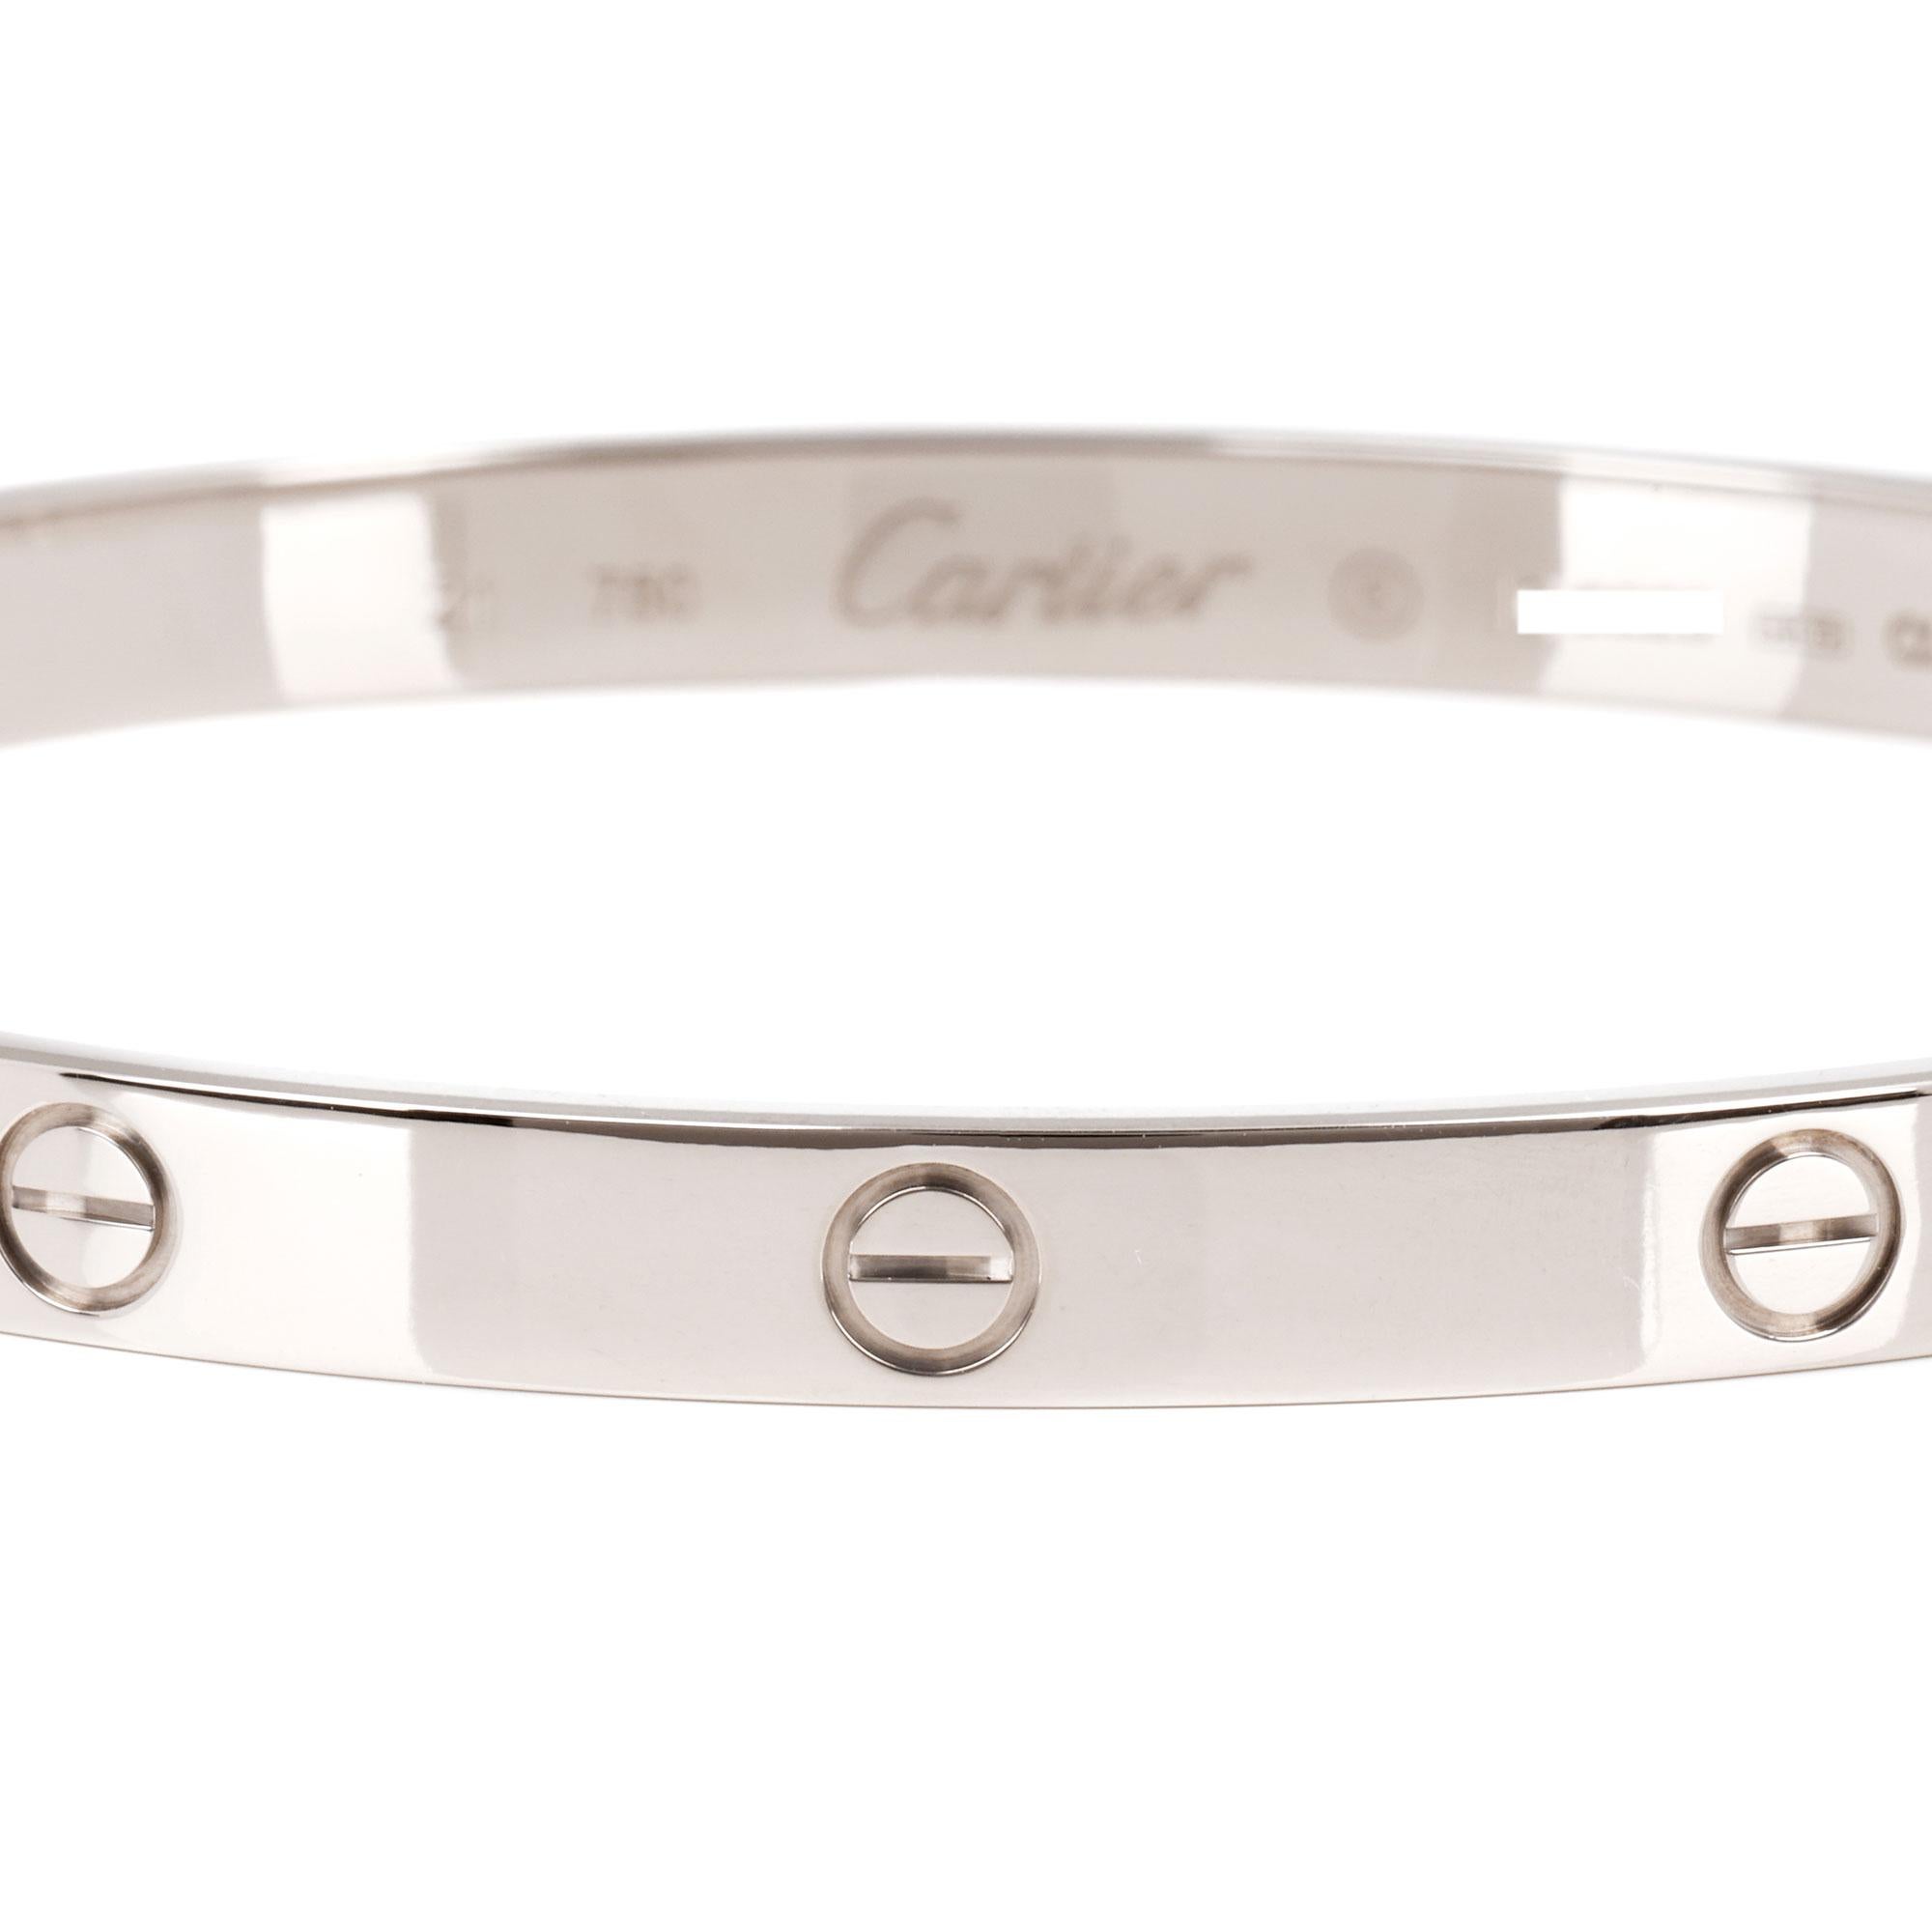 This bangle from Cartier is from their Love collection and features their iconic screw detailing set in 18ct white gold. Complete with a Cartier pouch and service papers. Our Xupes reference is J534 should you need to quote this. 